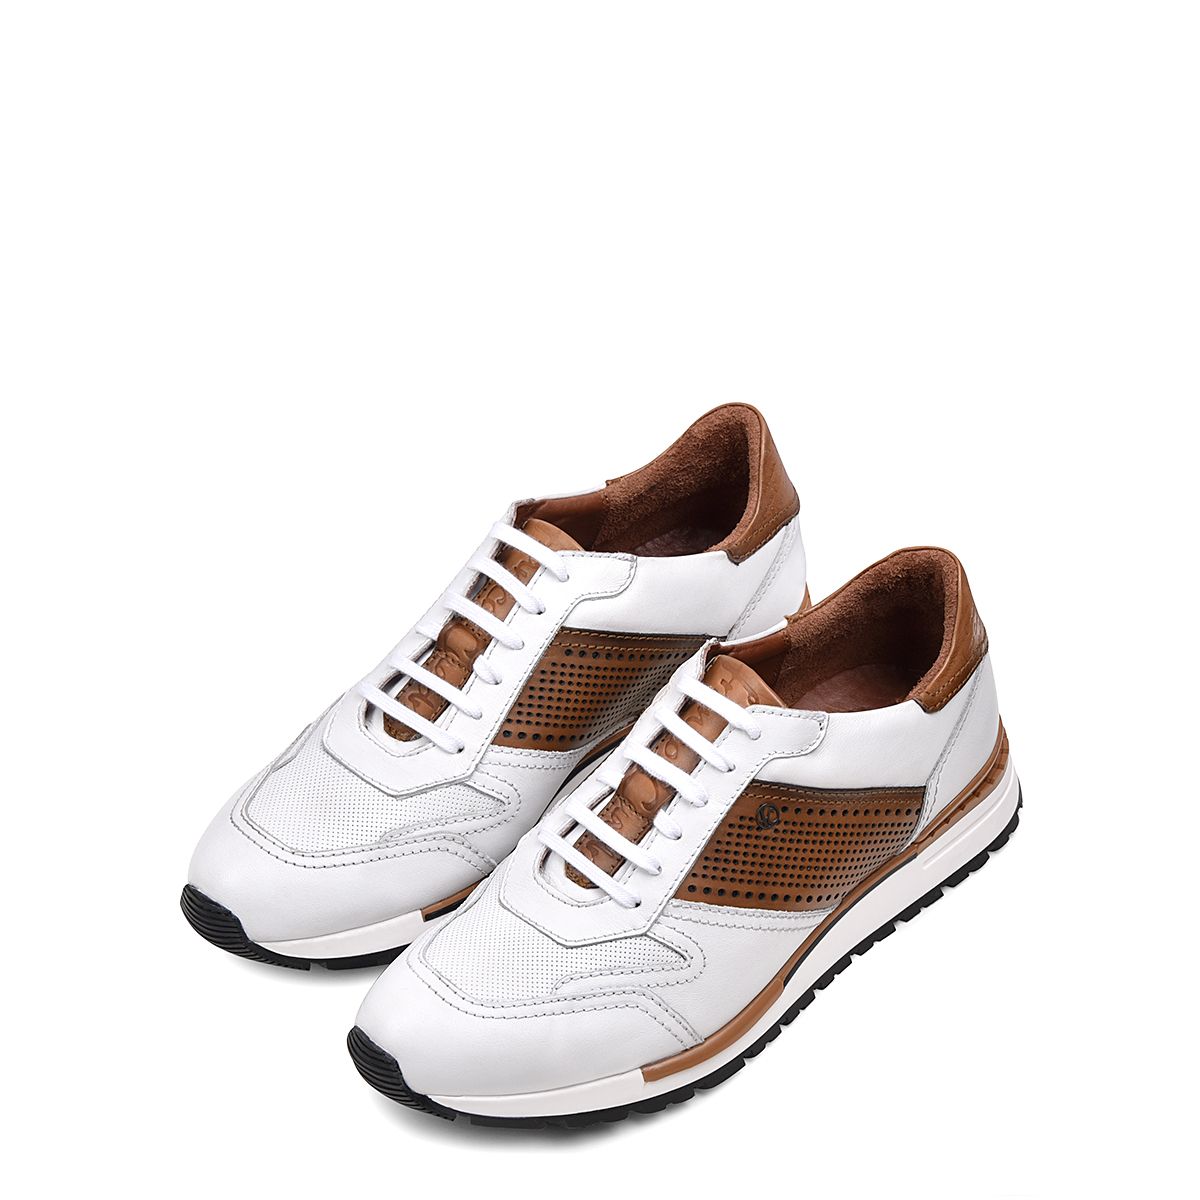 130KNTV - Cuadra white & brown casual fashion leather sneakers for men-Kuet.us